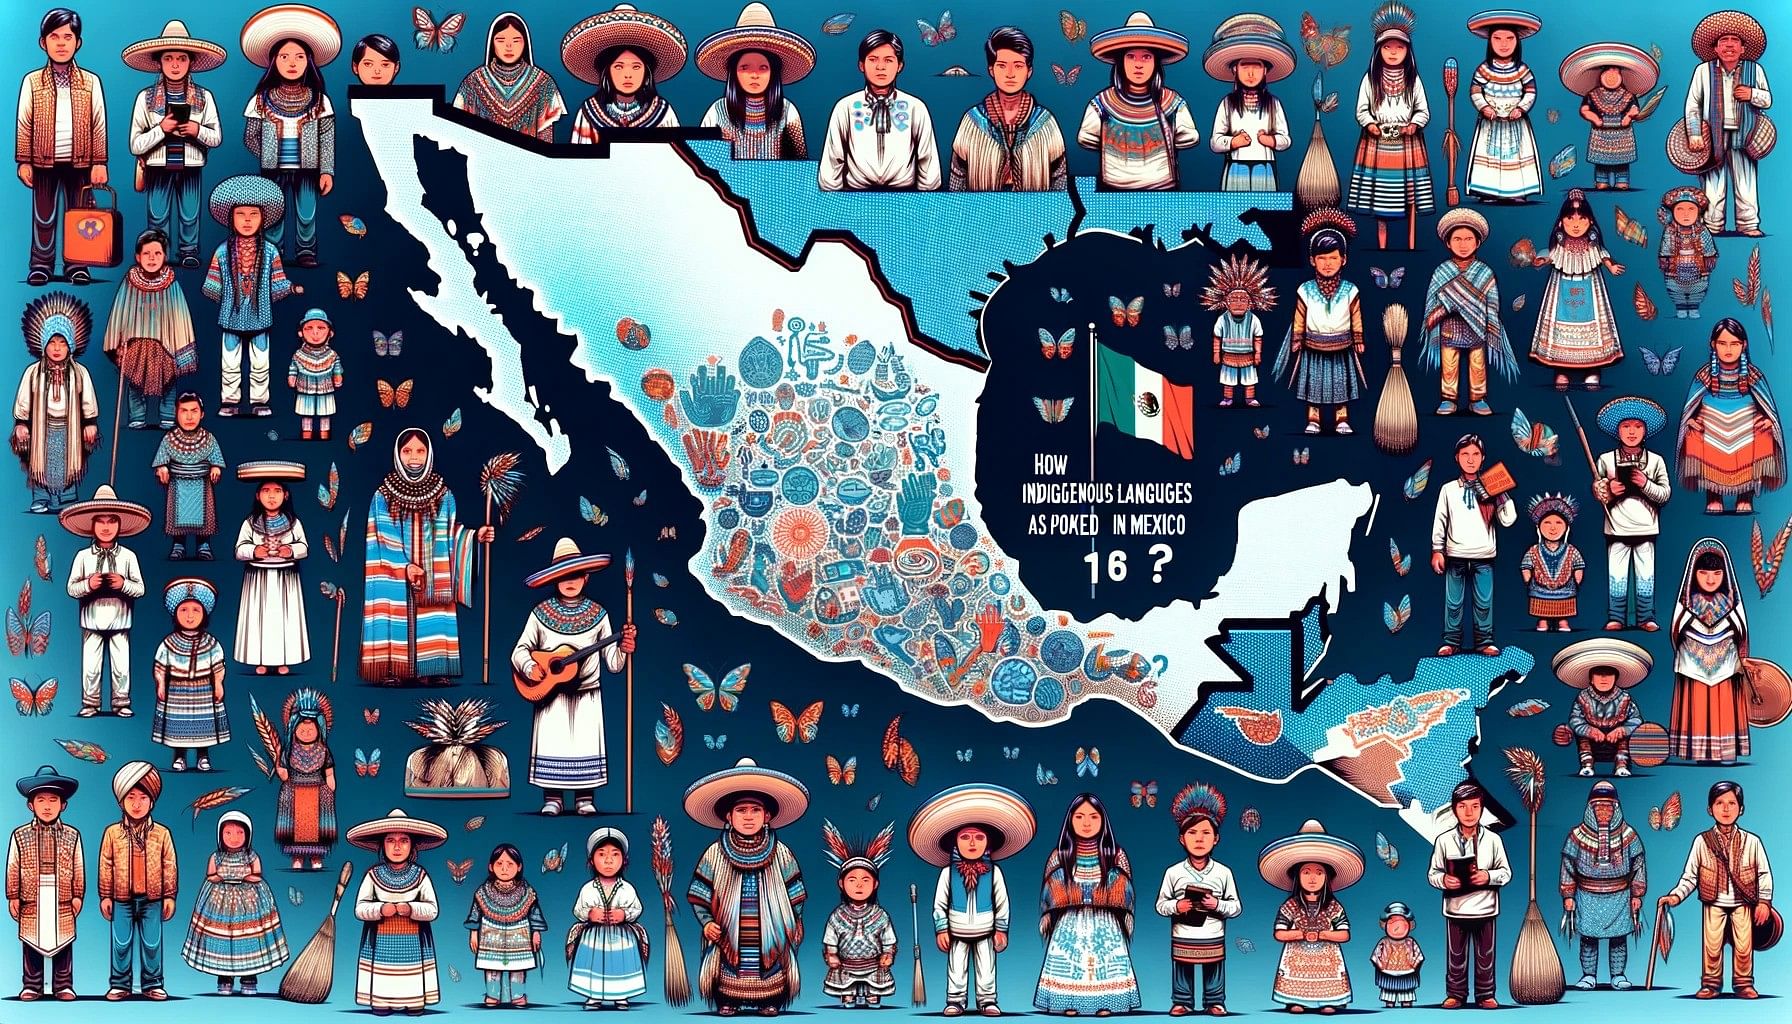 How Many Indigenous Languages are Spoken in Mexico?